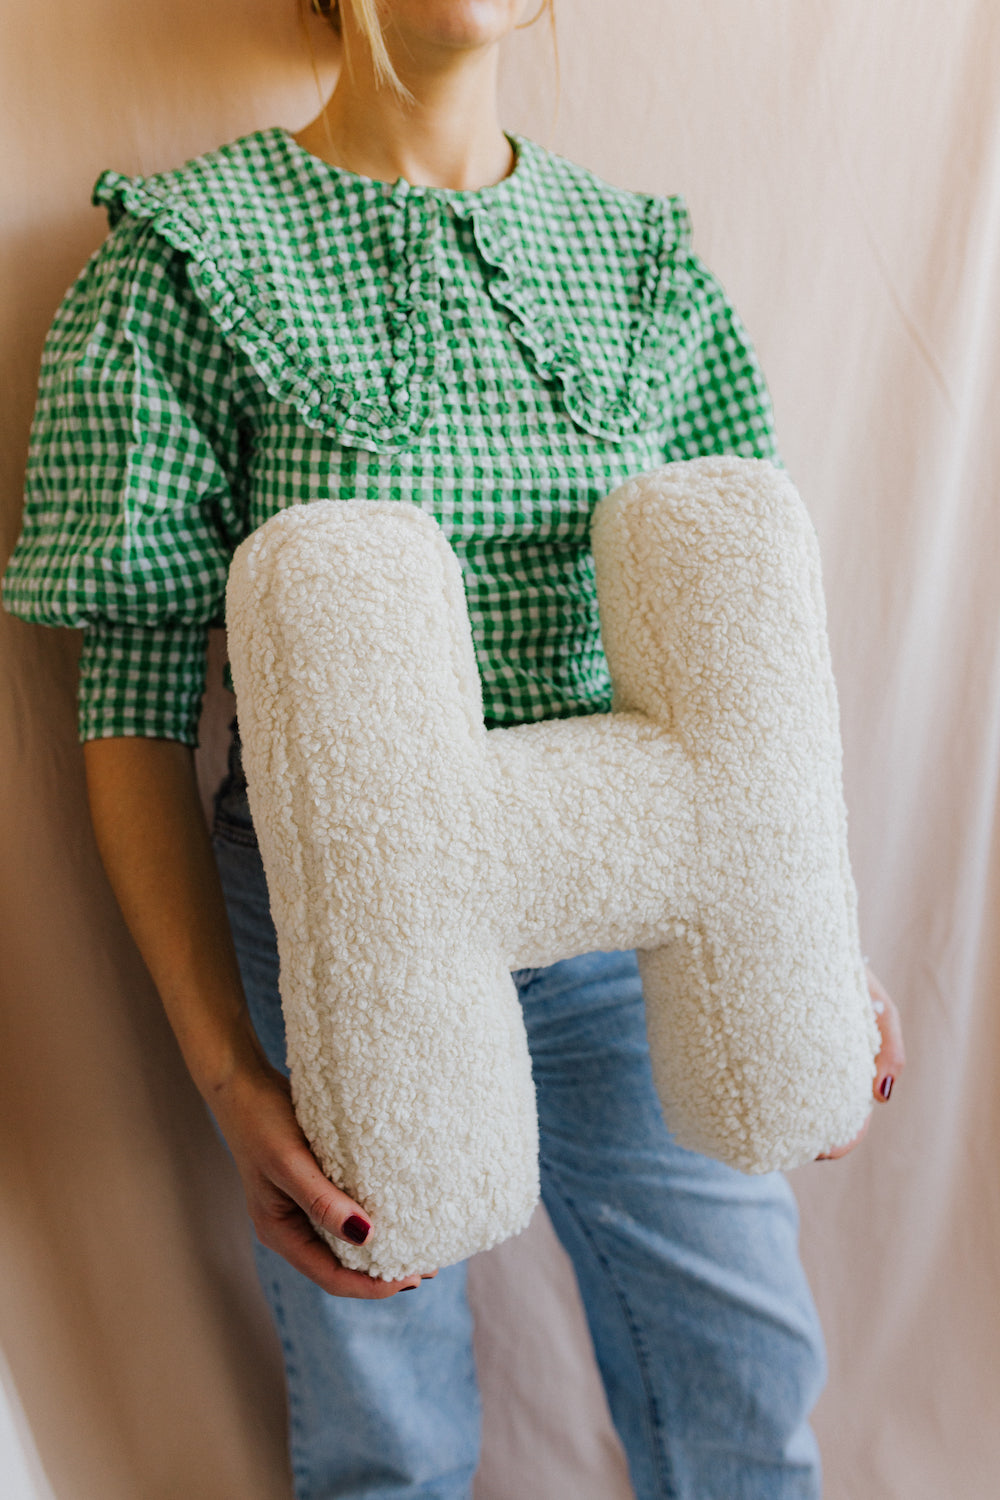 Boucle Letter cushion H by Bettys Home Teddy Letter Pillow held by woman in green shirt and blue jeans as birthday gift 